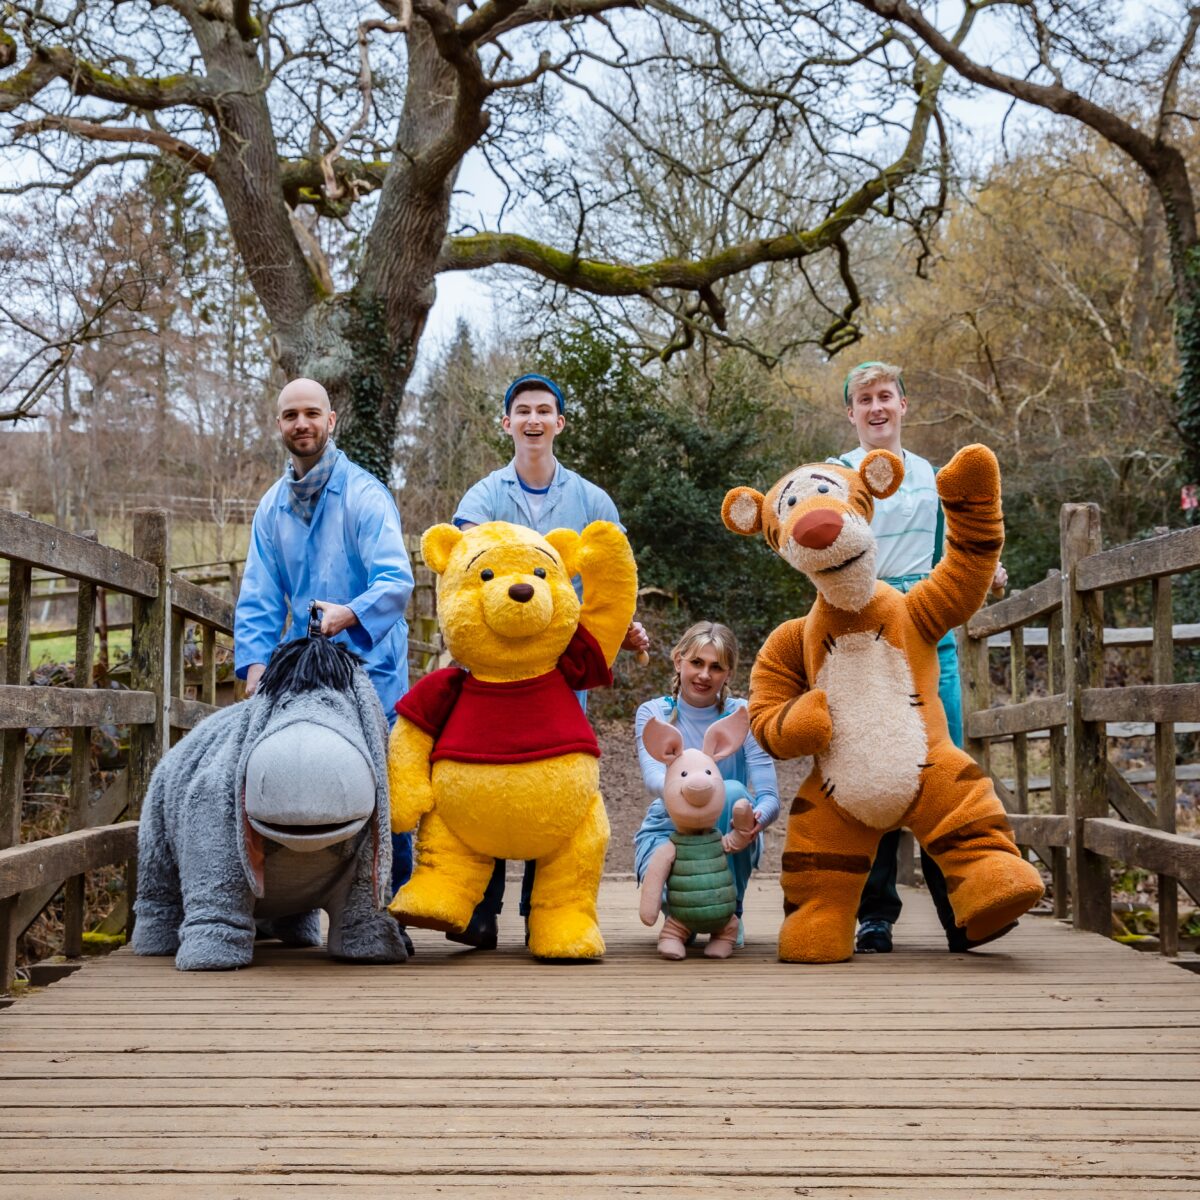 Preview: Winnie the Pooh: A New Musical Adaptation, Mayflower Theatre, Southampton